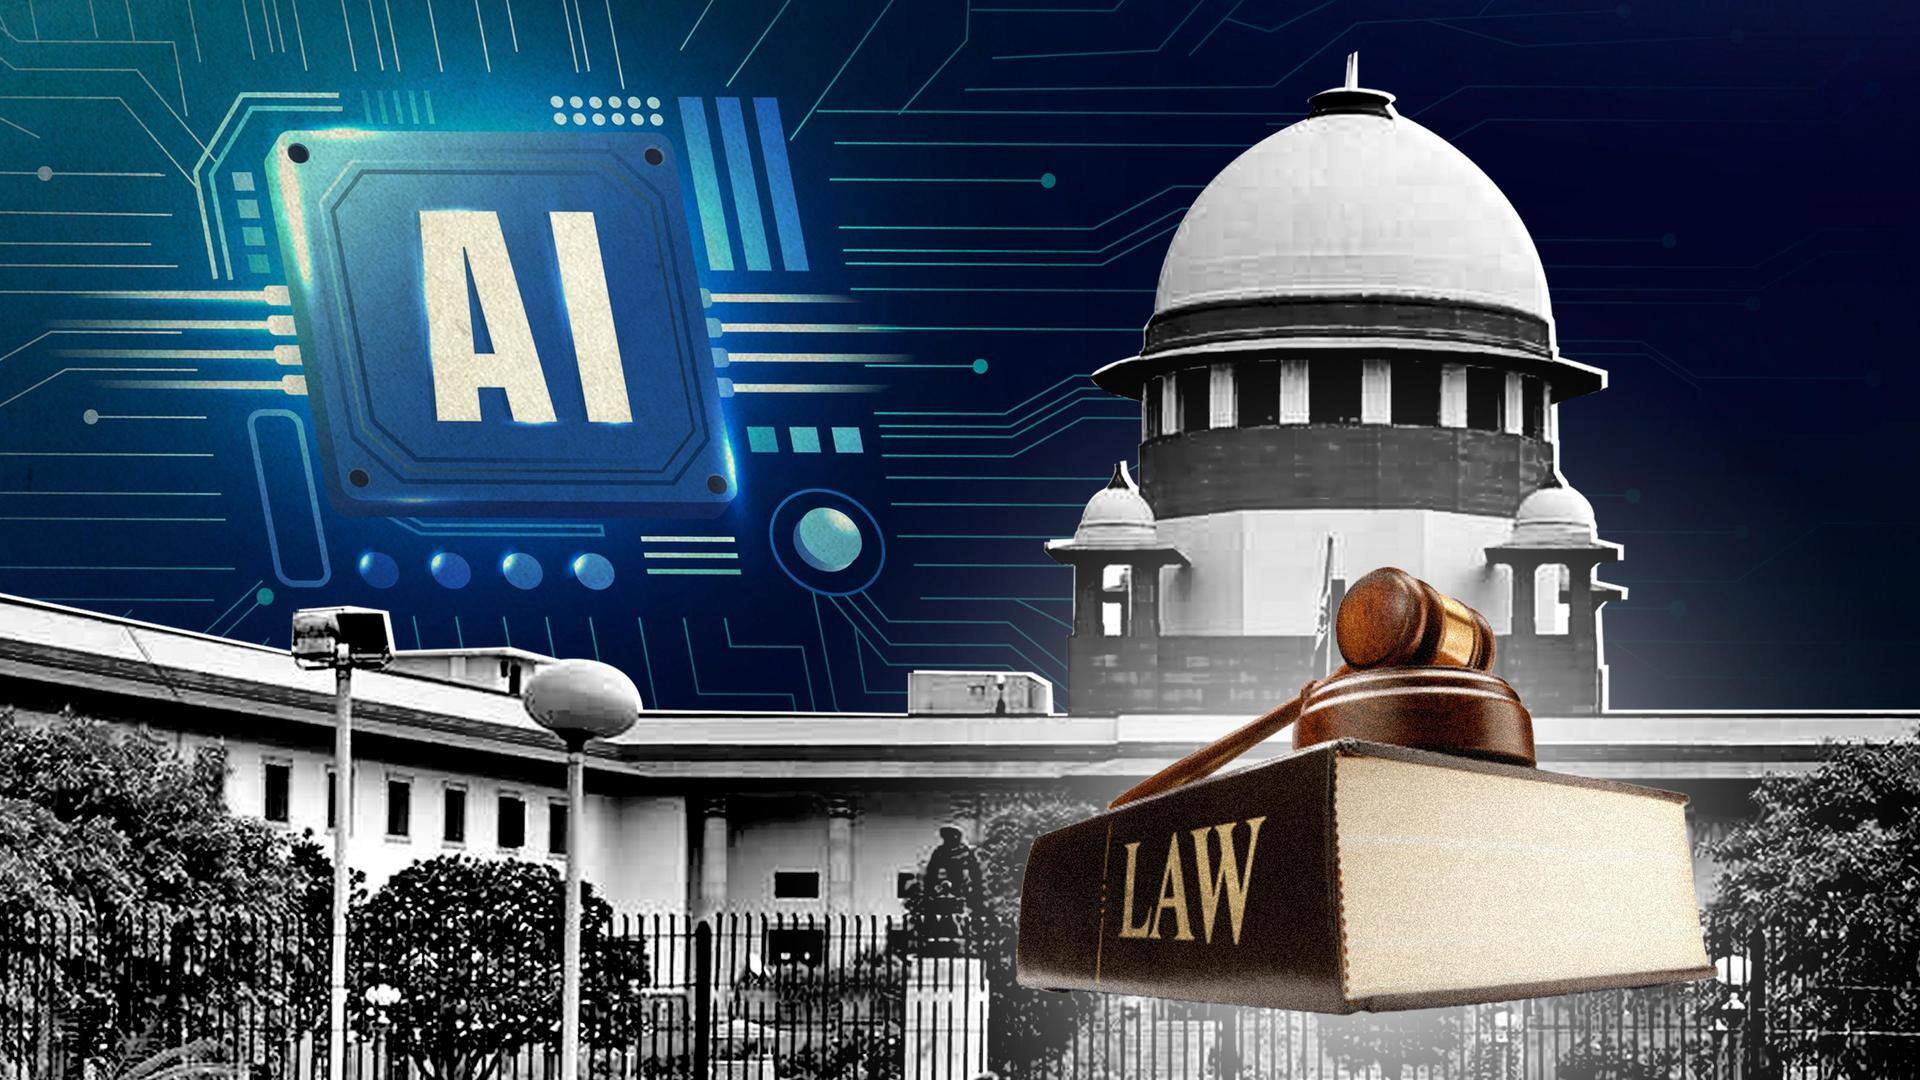 SC is using AI to transcribe proceedings: Here's why